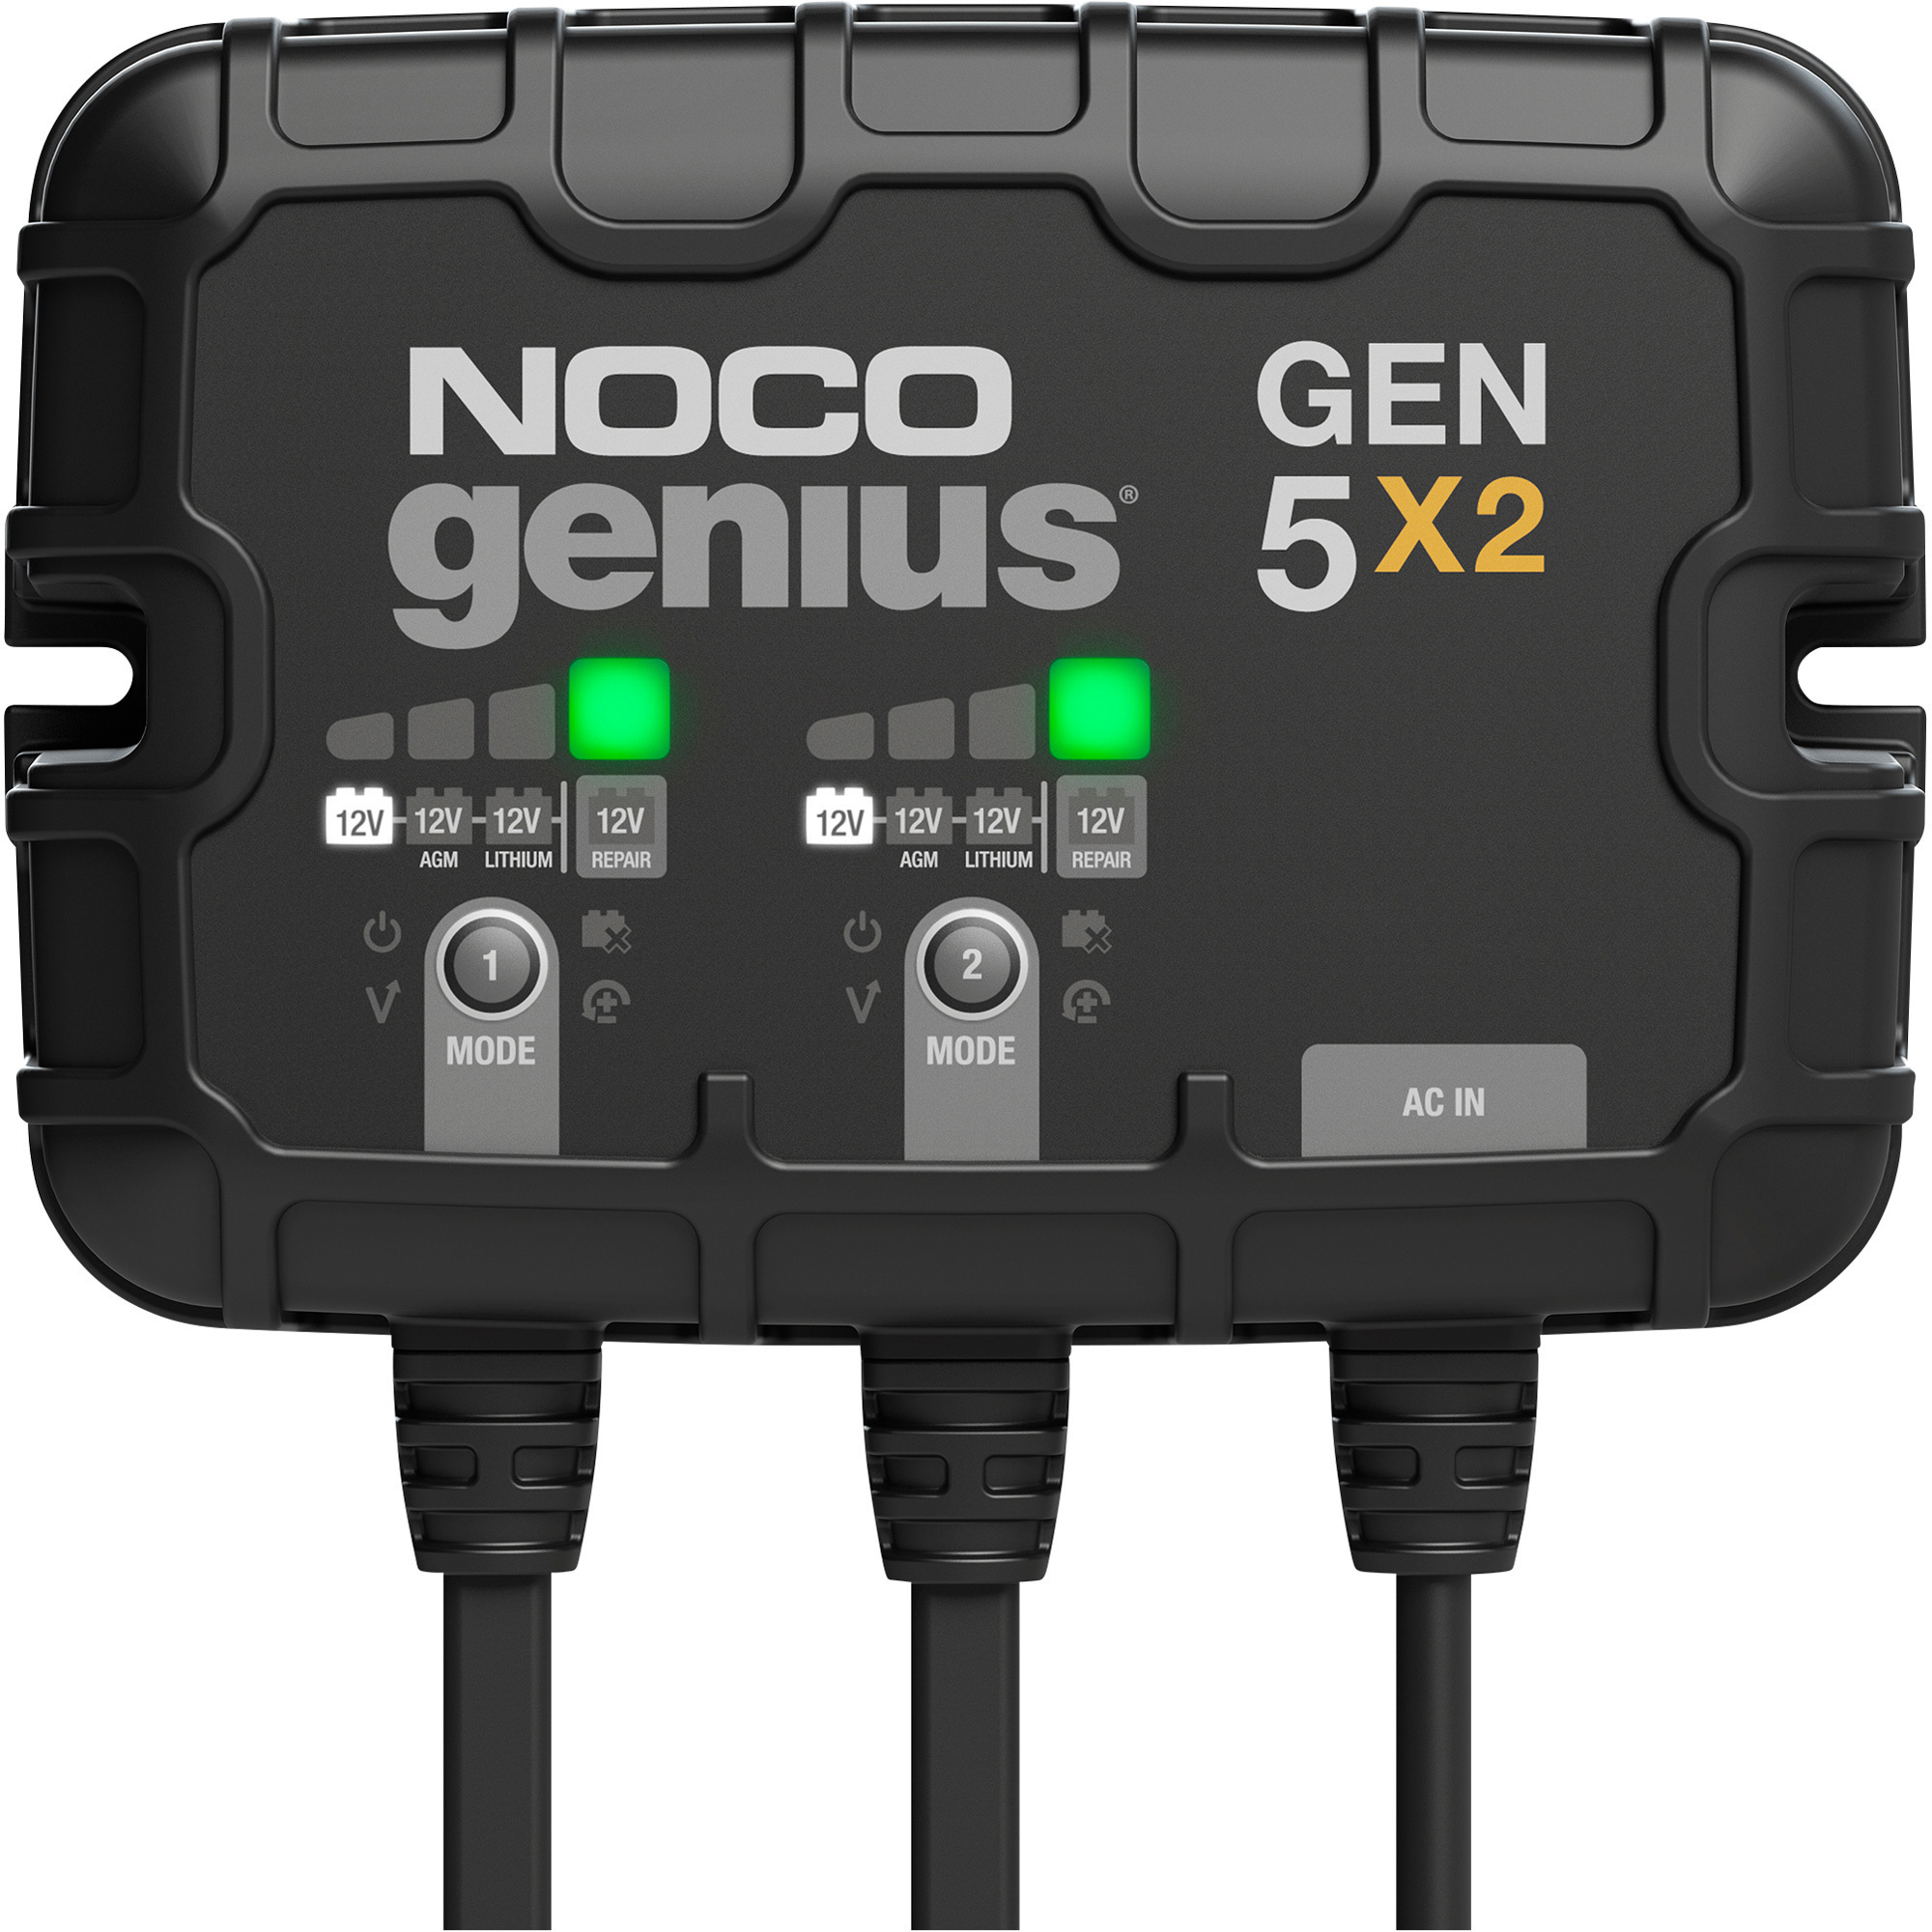 Noco Genius Onboard Battery Charger/Maintainer/Desulfator â 2 Banks, 10 Amps, Model GEN5X2